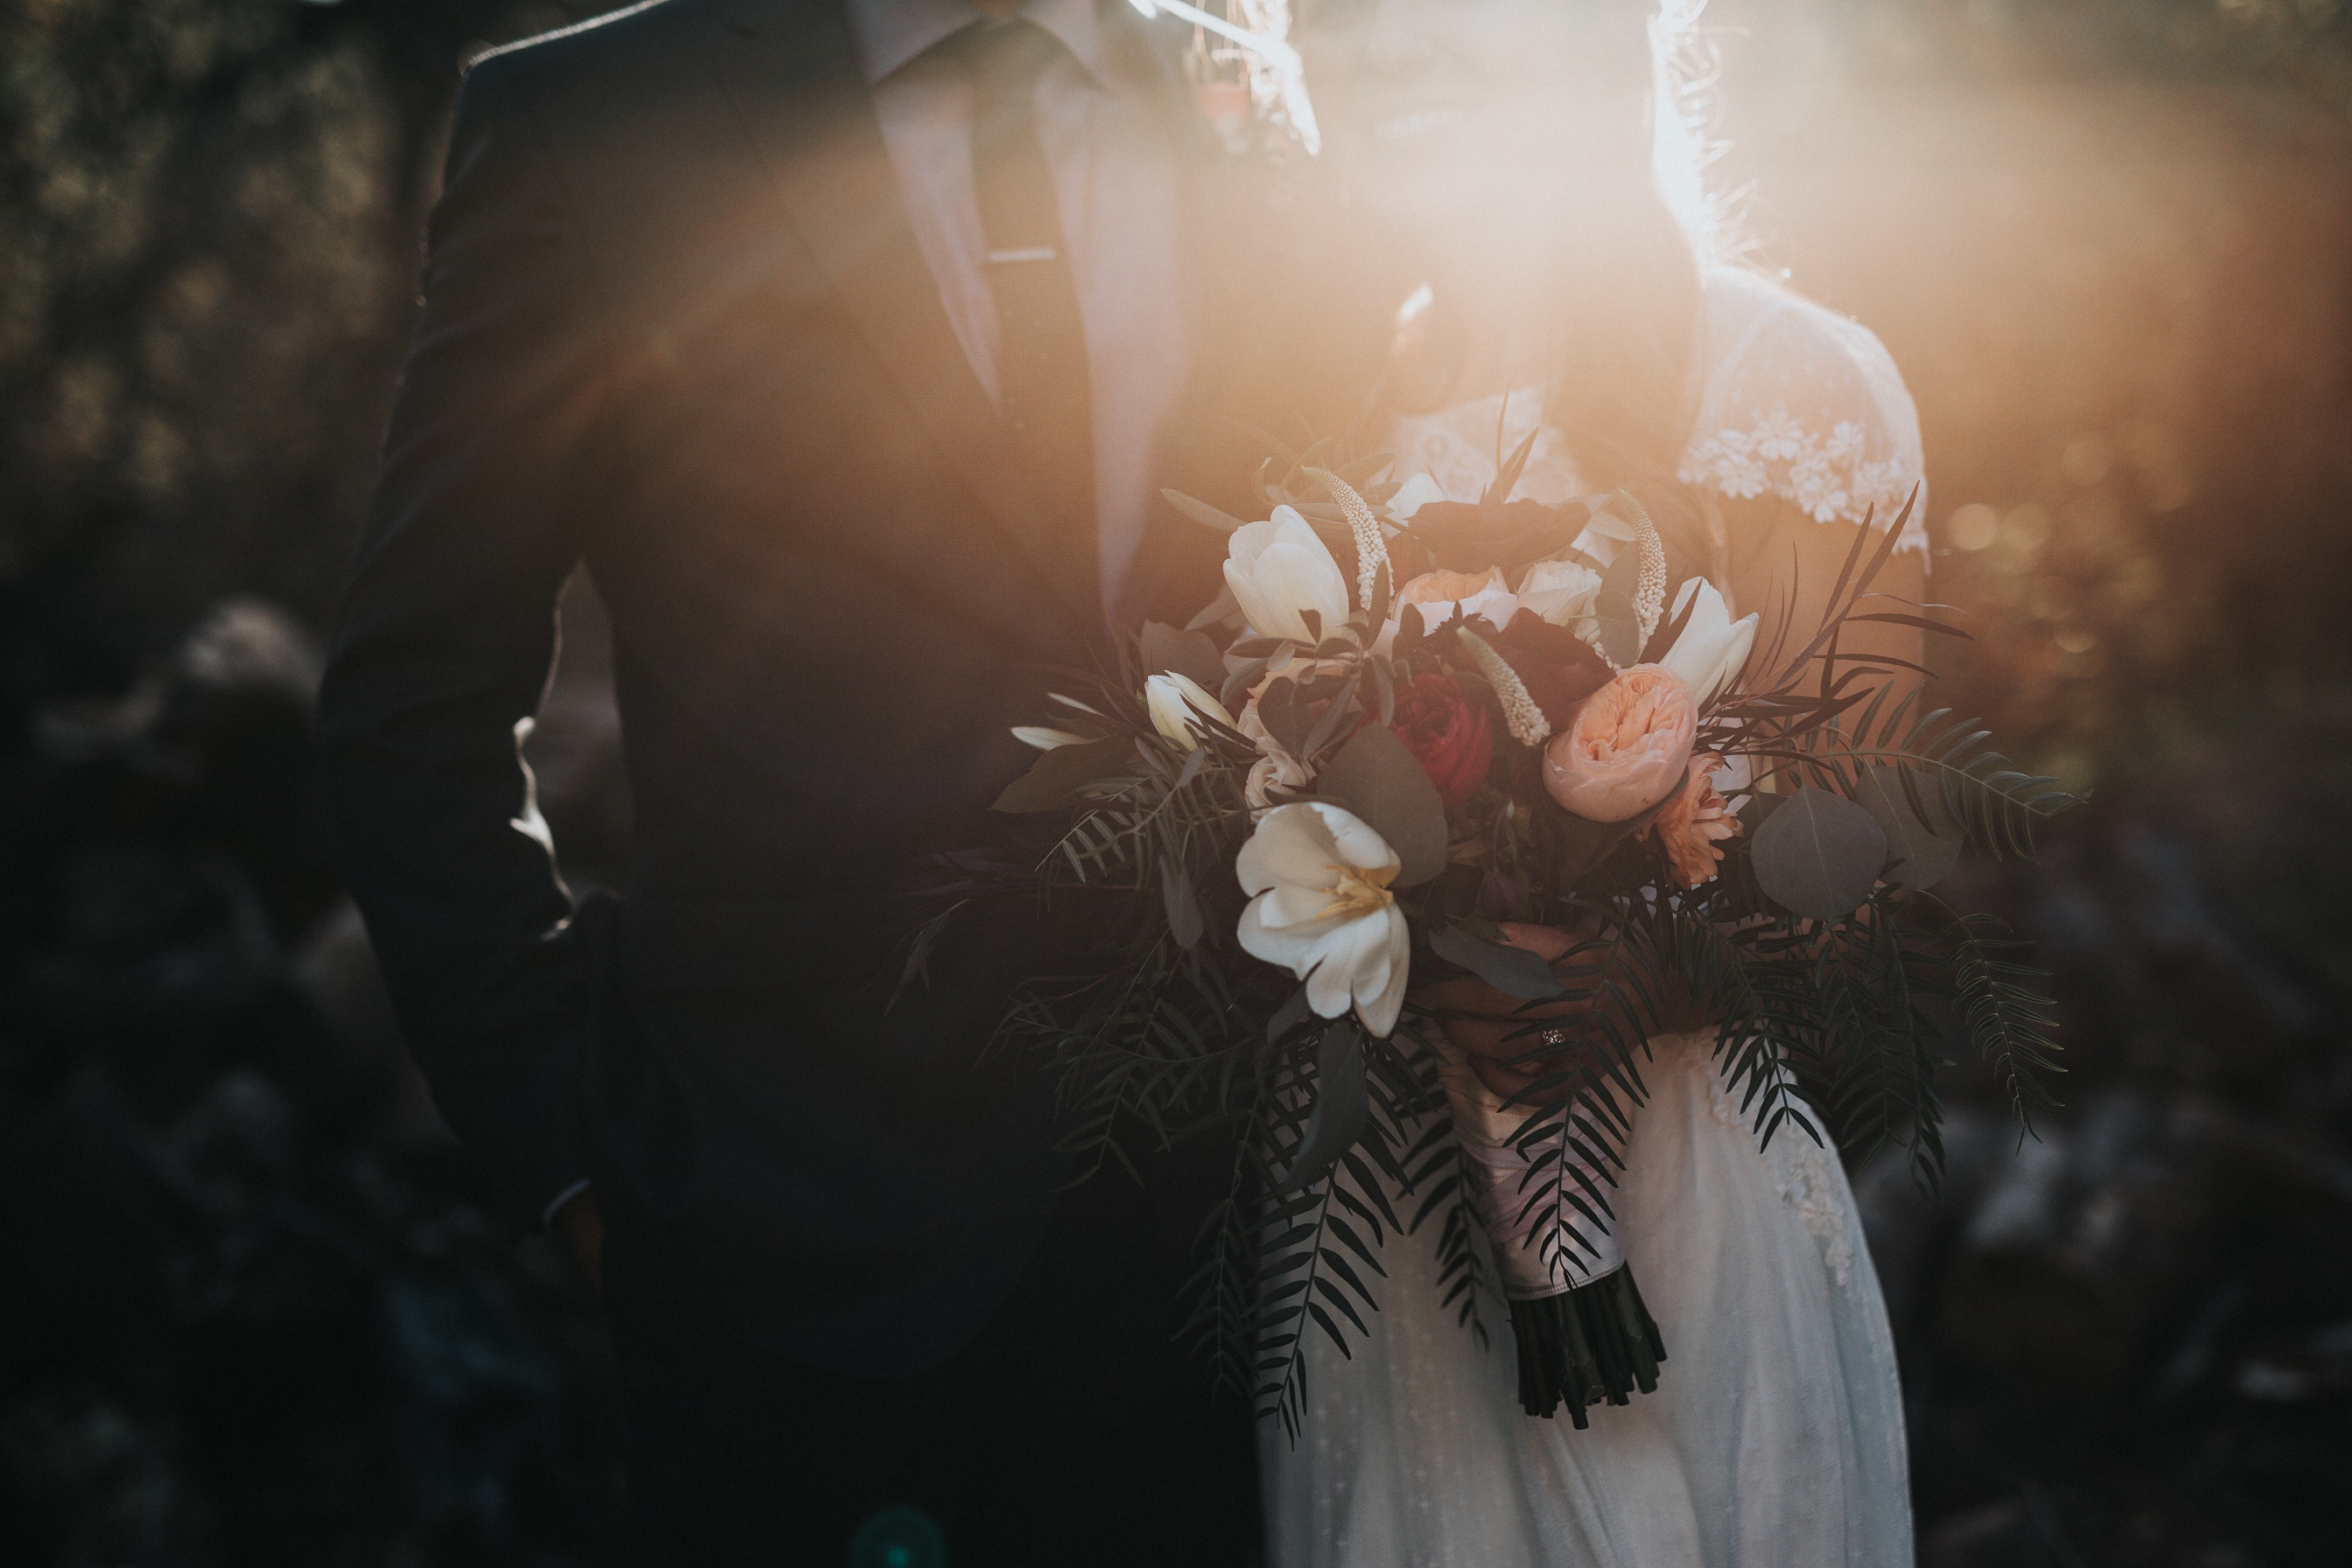 Slightly darkened image of a man in a tux and woman in a wedding dress holding a bouquet of flowers shot from the shoulders down.